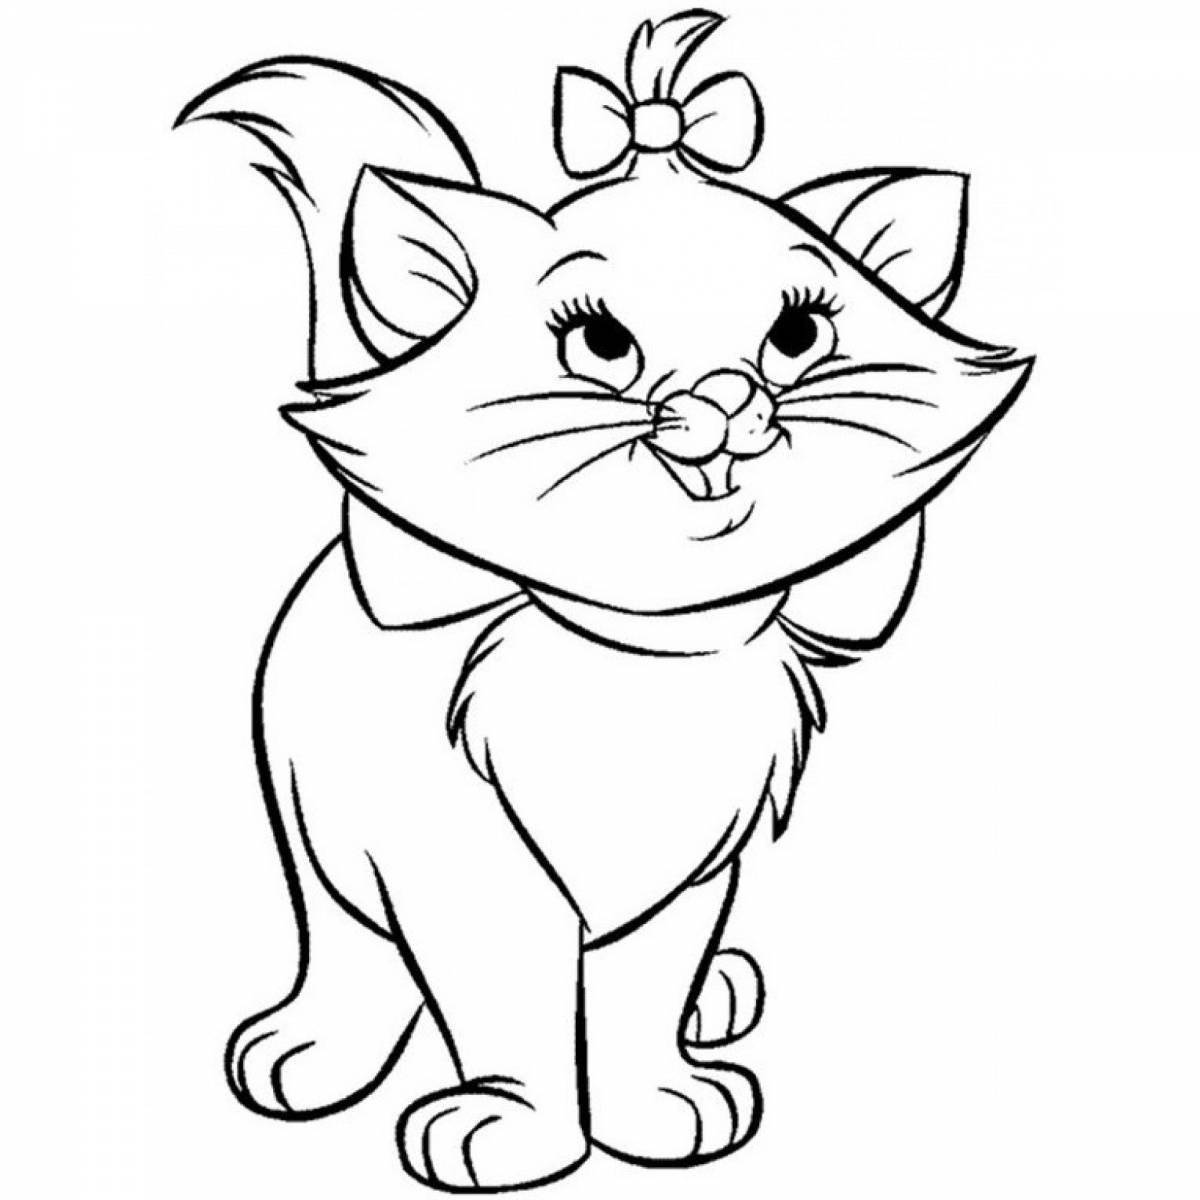 Coloring book for cats